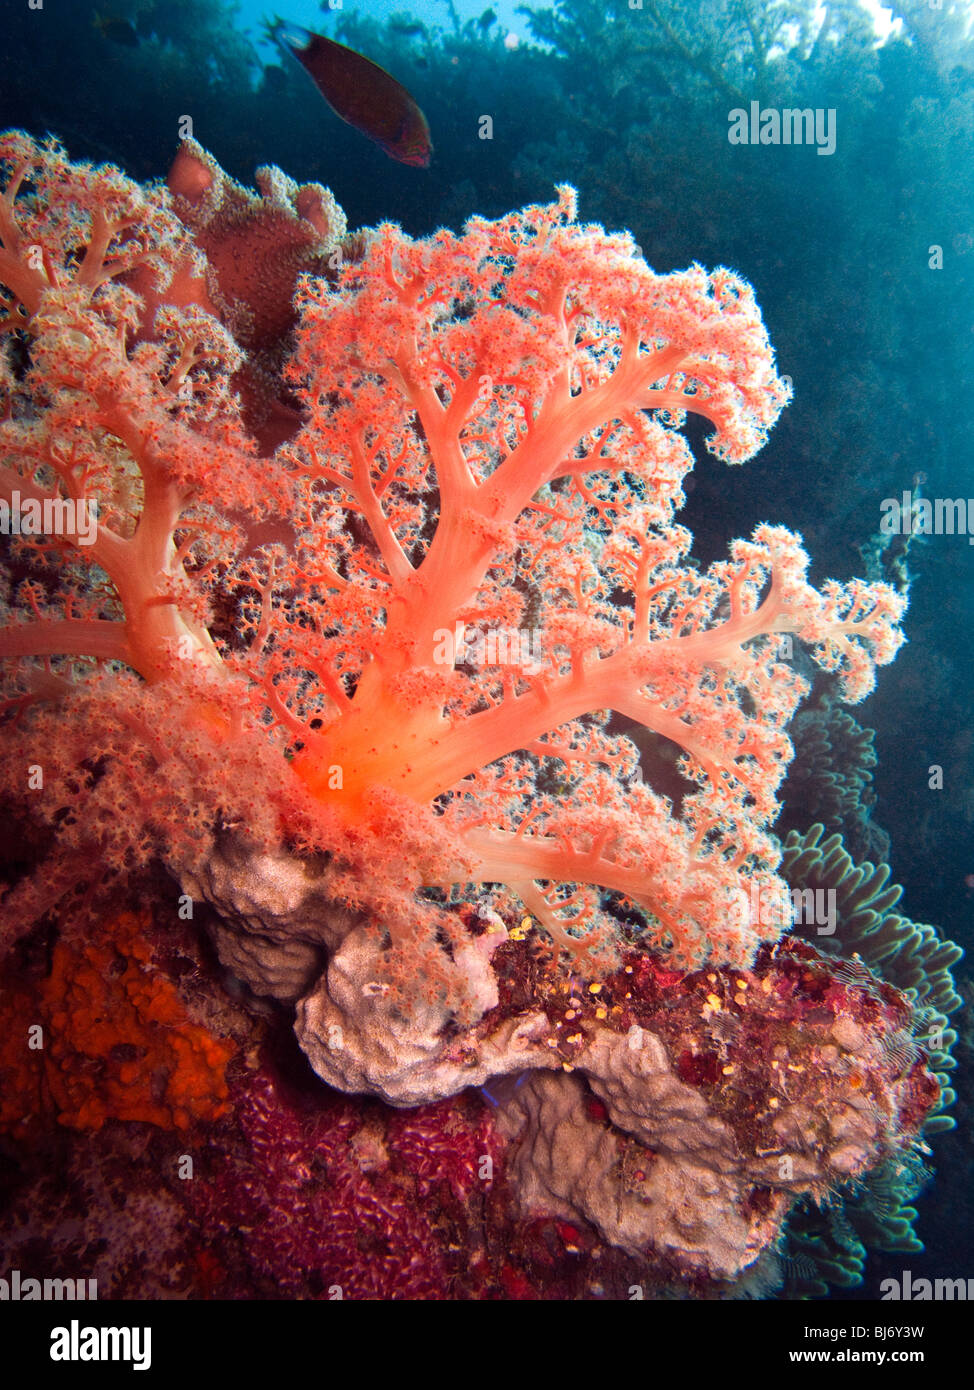 Indonesia, Sulawesi, Wakatobi National Park, underwater, colourful red soft coral Dendronephthya sp Stock Photo